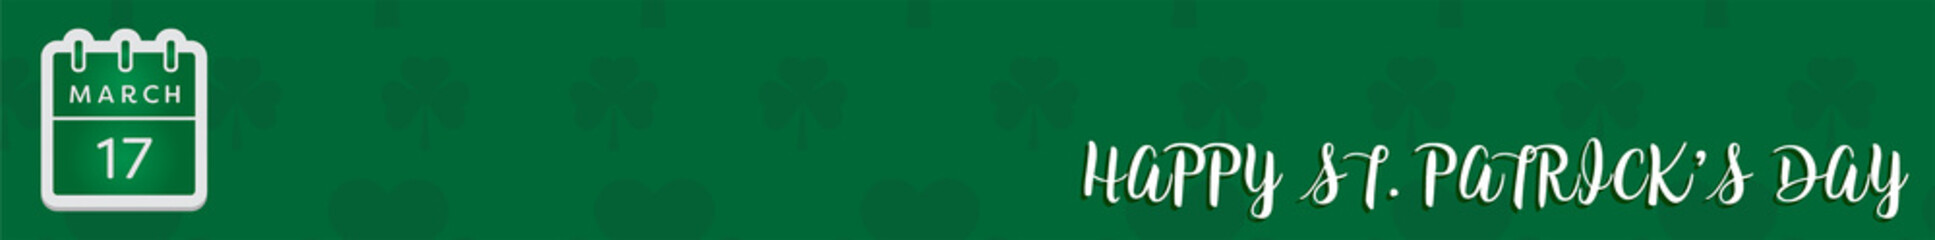 Digital png illustration of clovers and happy st patrick's day text on transparent background